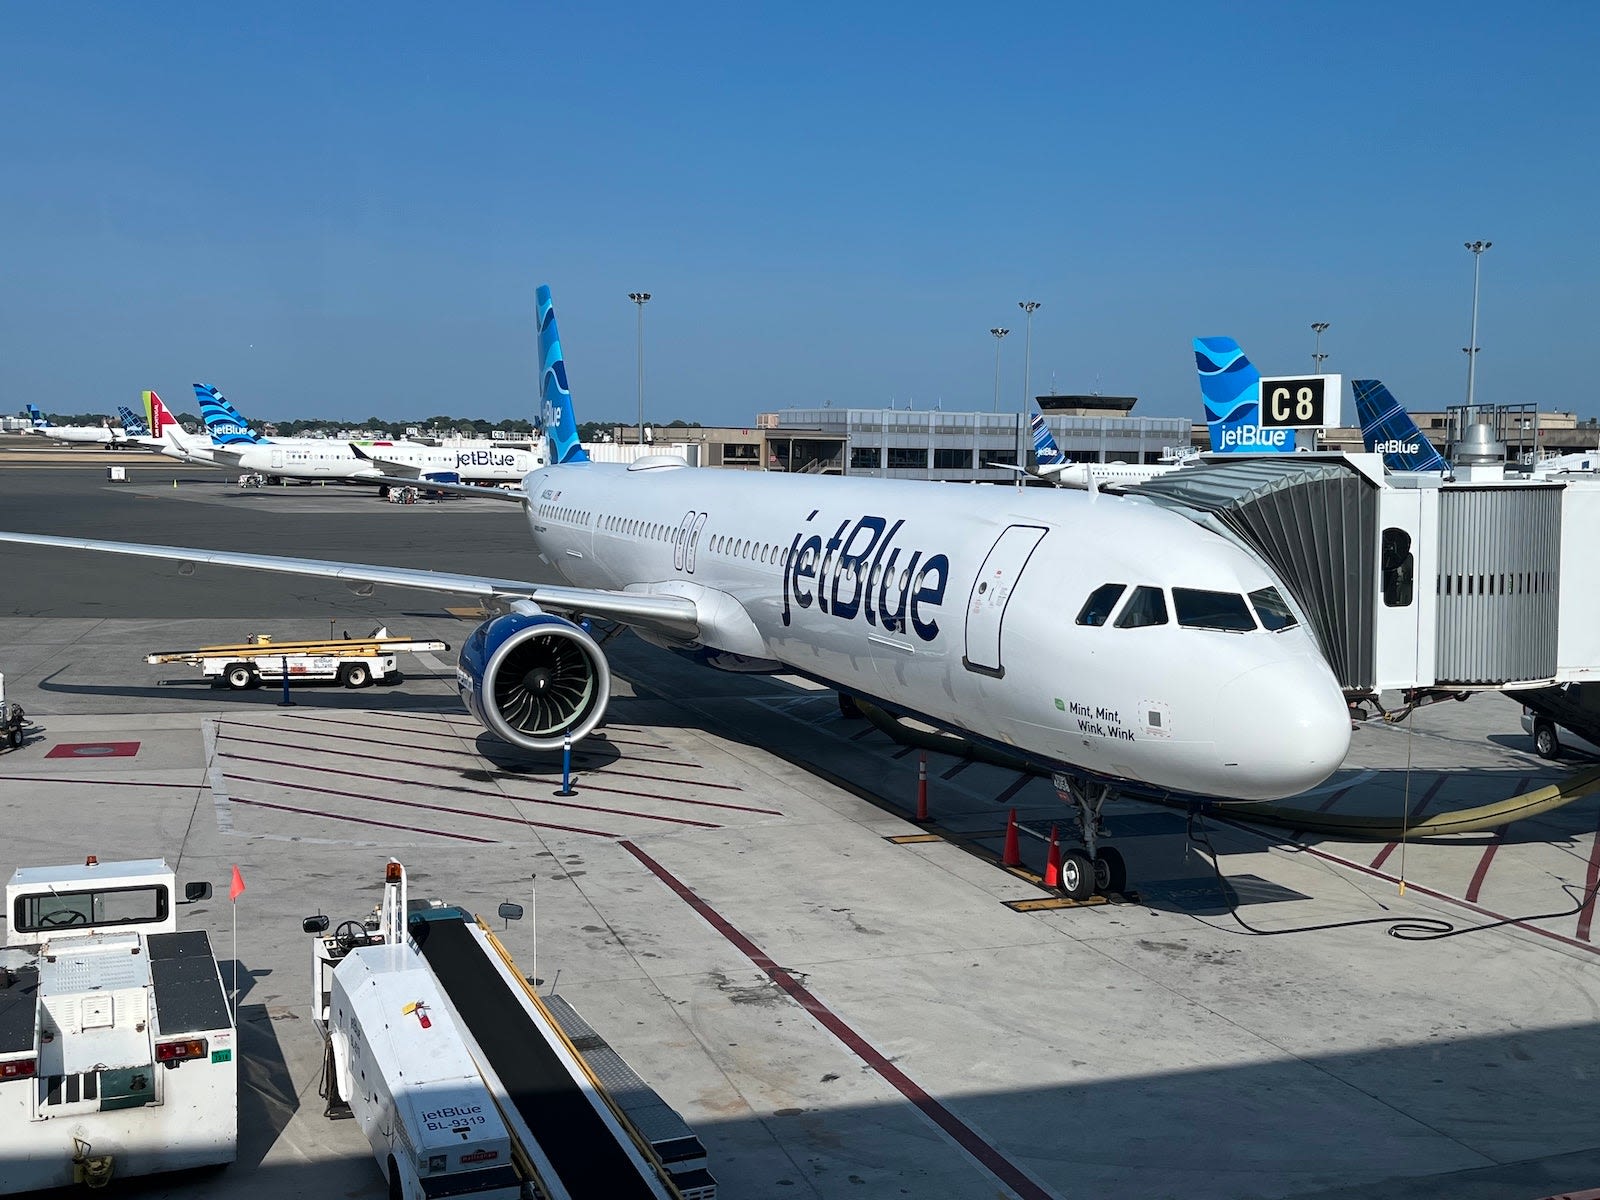 JetBlue adds Caribbean and Mint service, but cuts slew of routes in network shakeup - The Points Guy